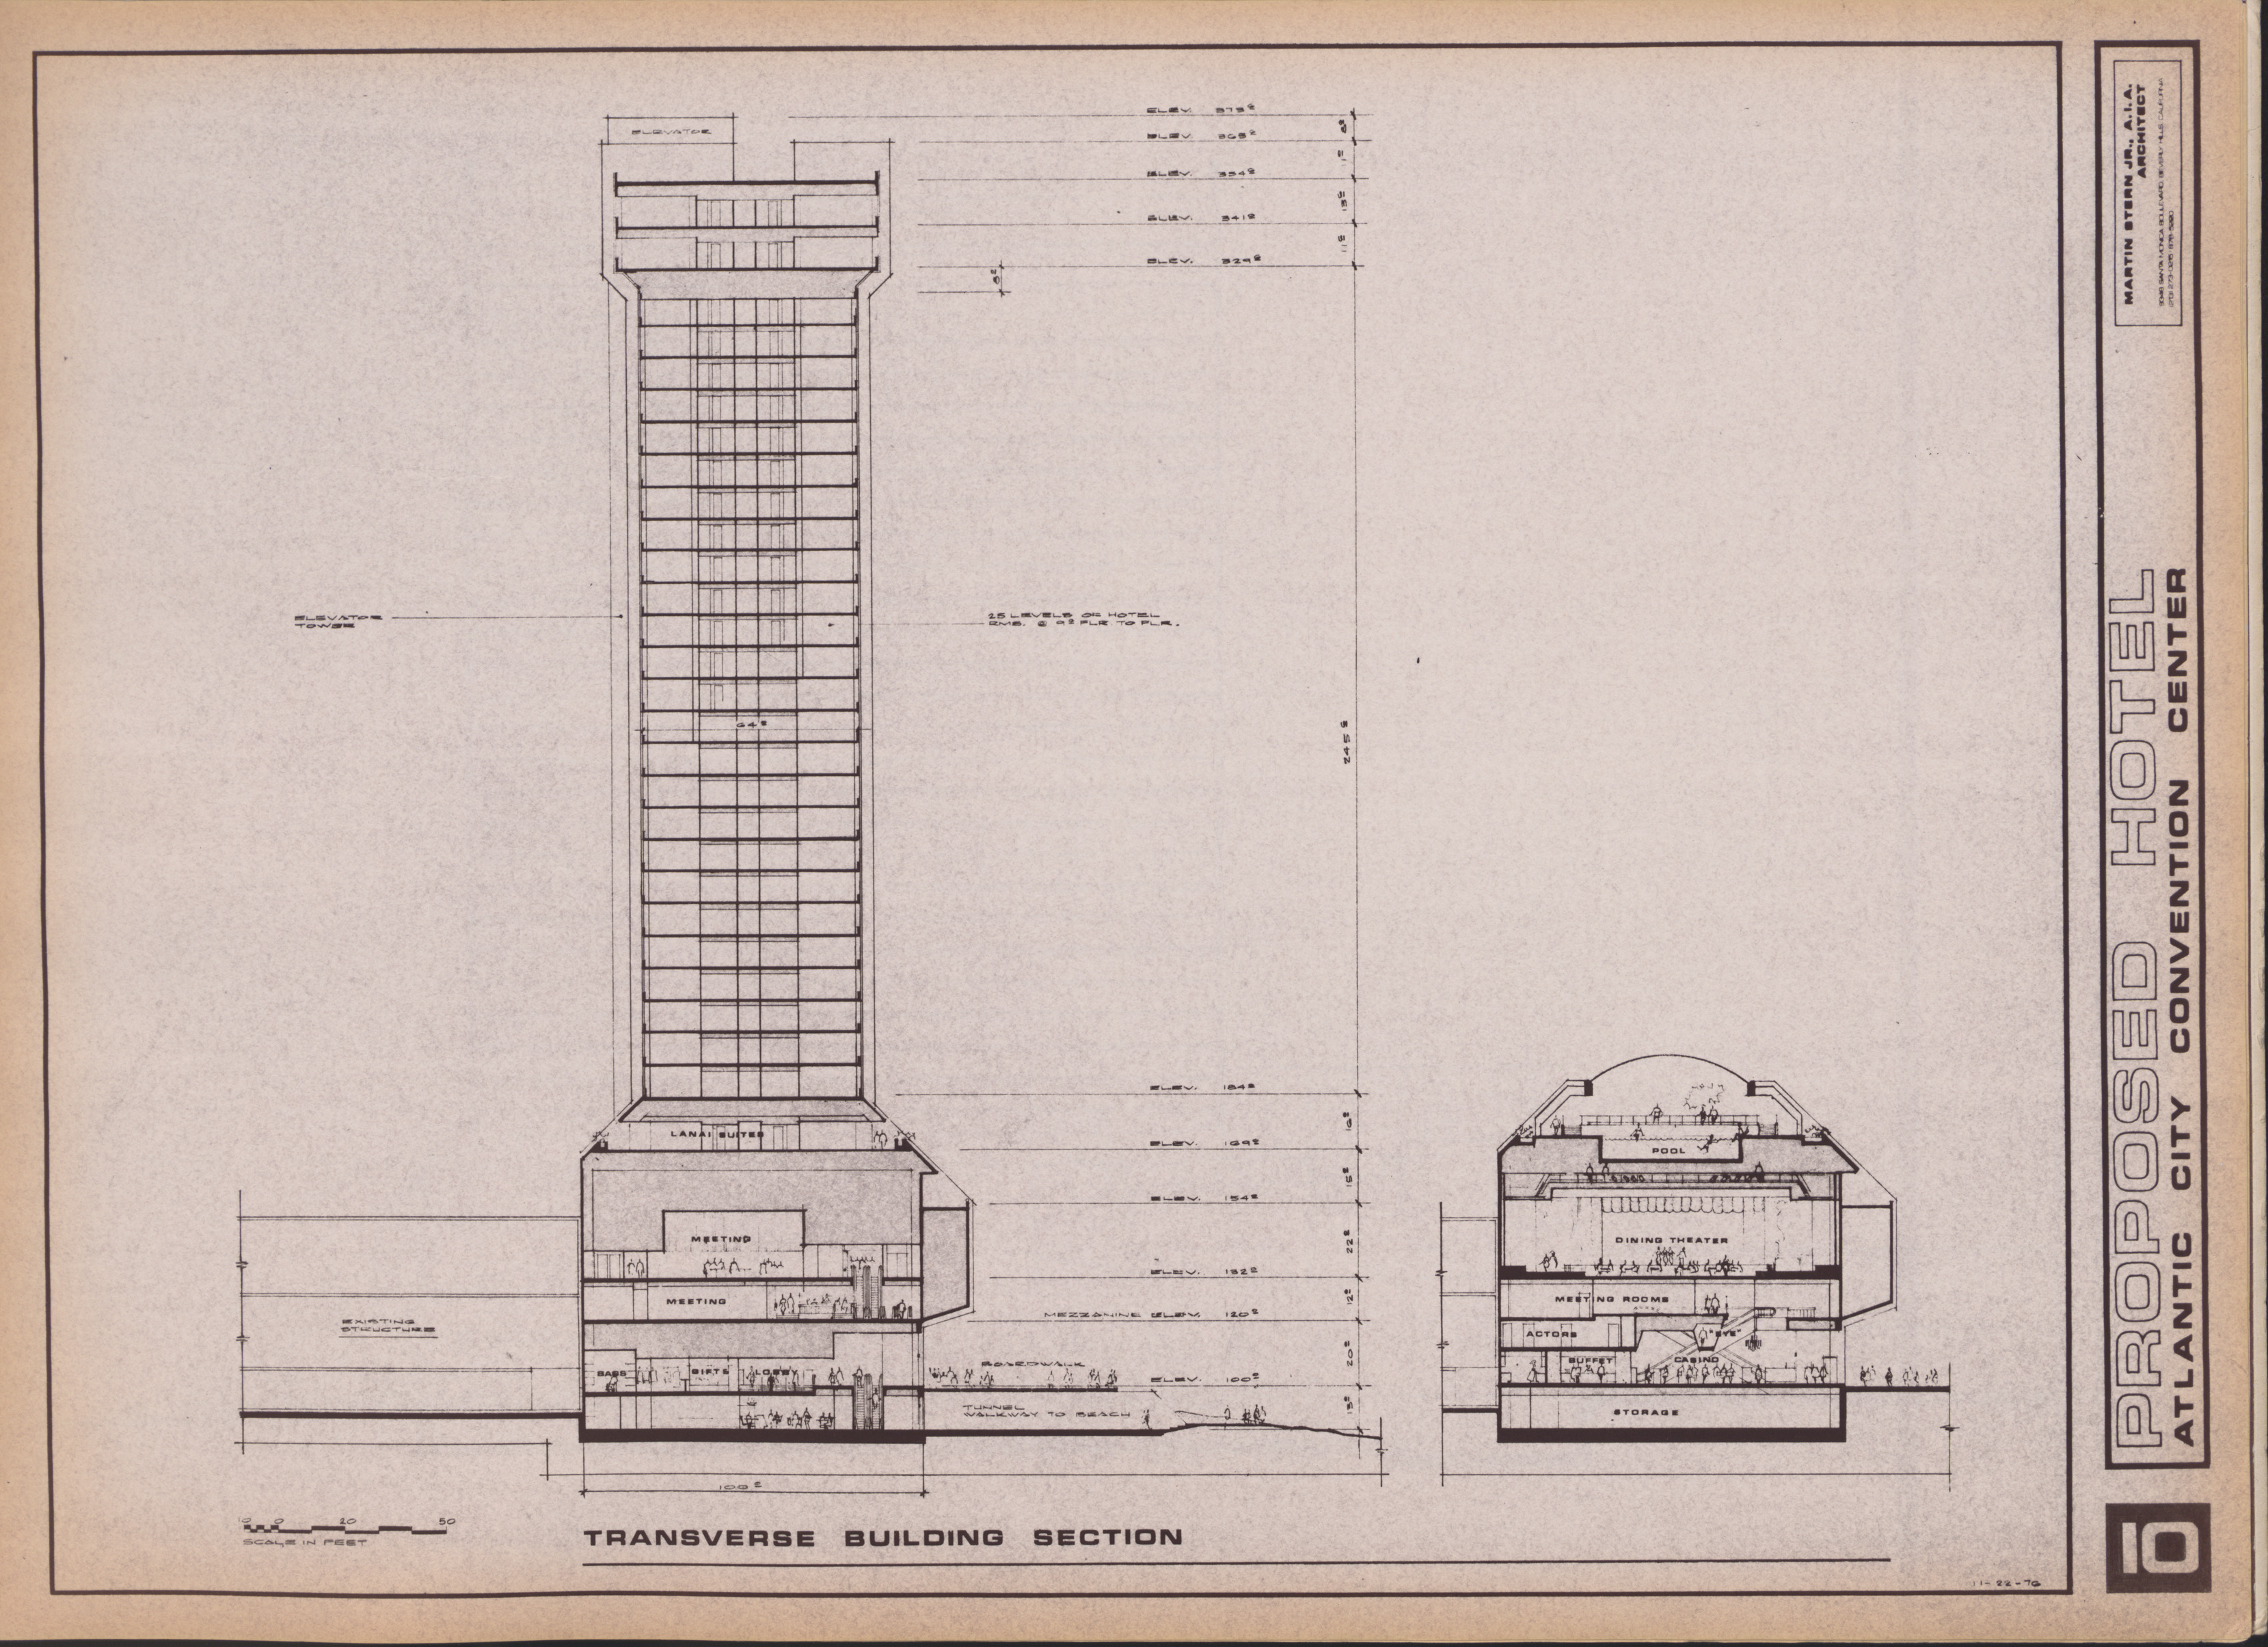 Proposed Hotel, Atlantic City Convention Center, image 10